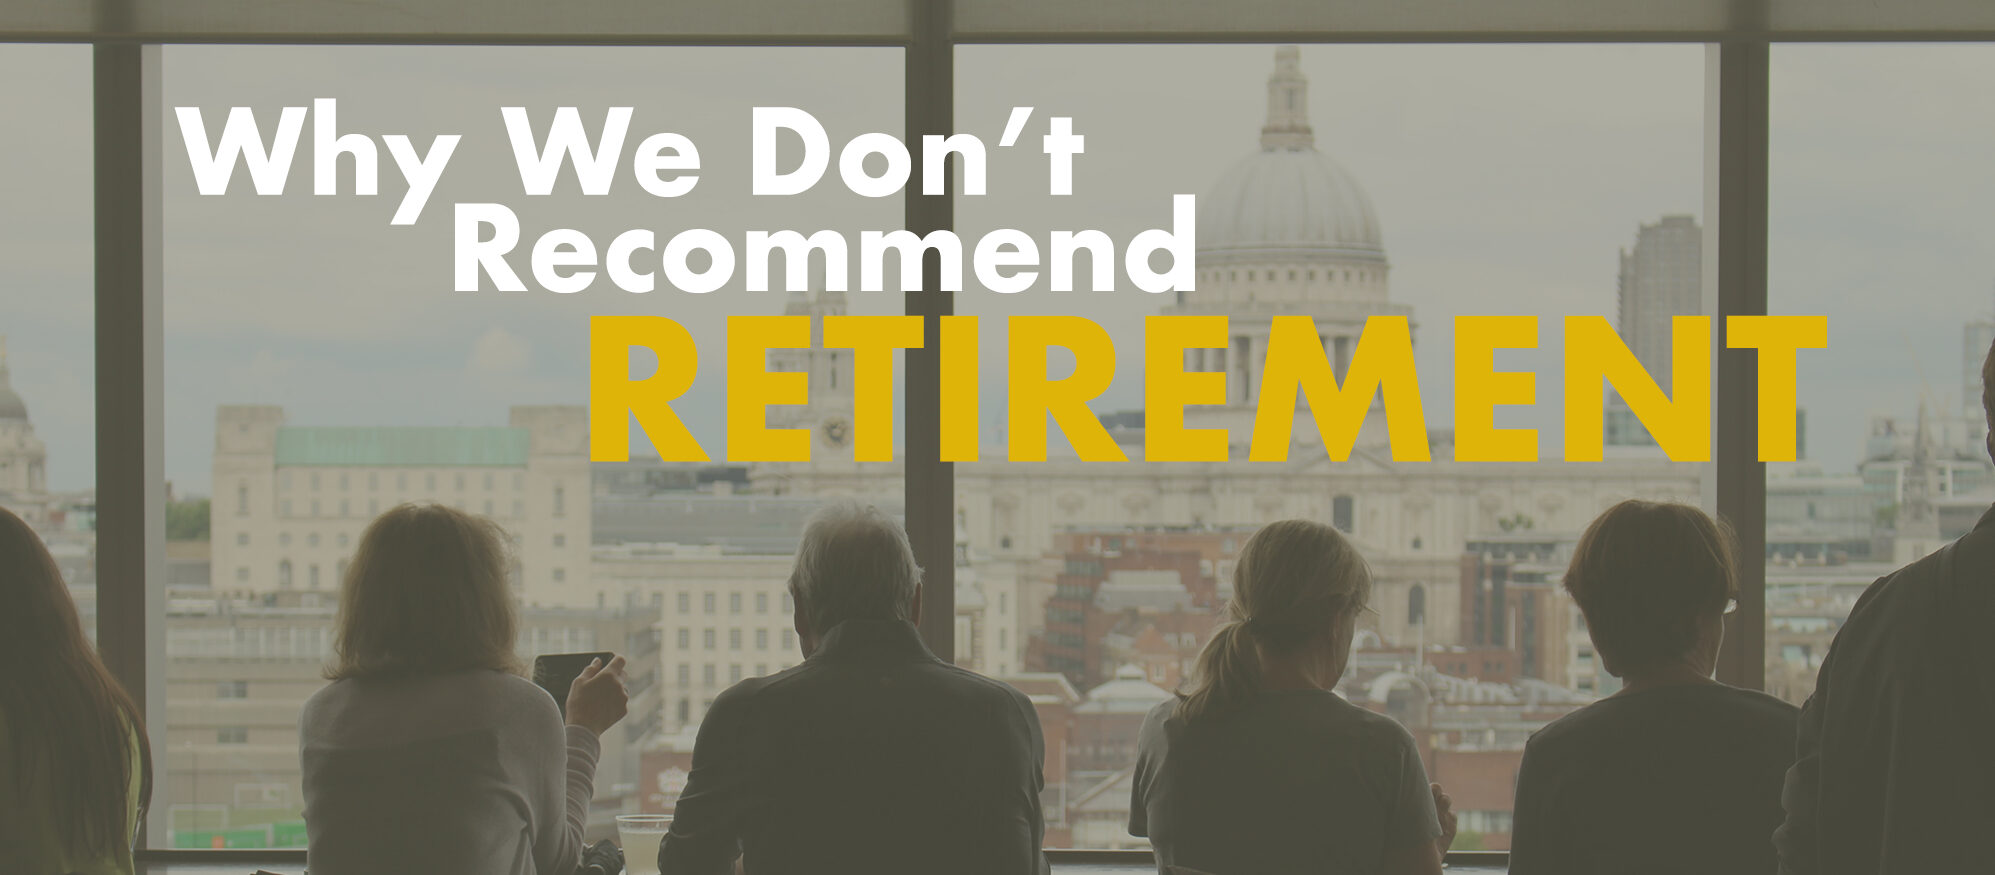 Why we don’t recommend retirement